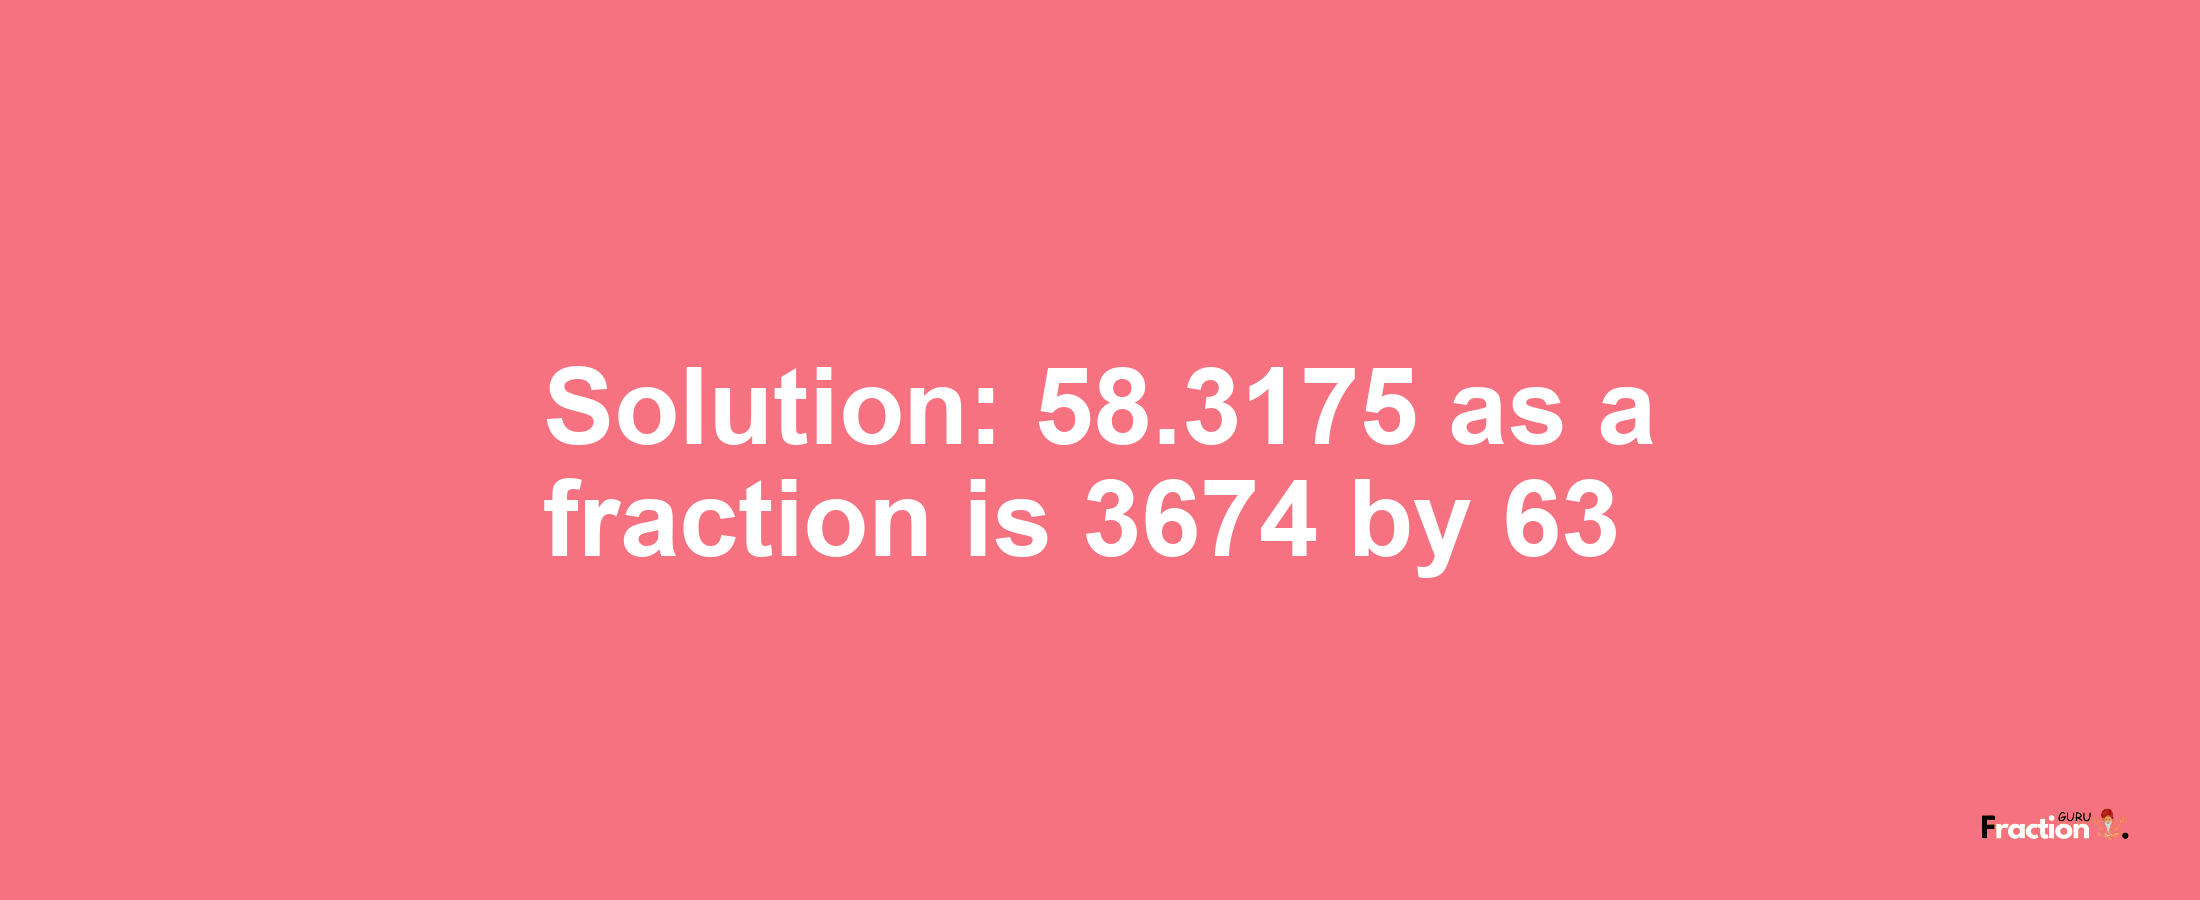 Solution:58.3175 as a fraction is 3674/63